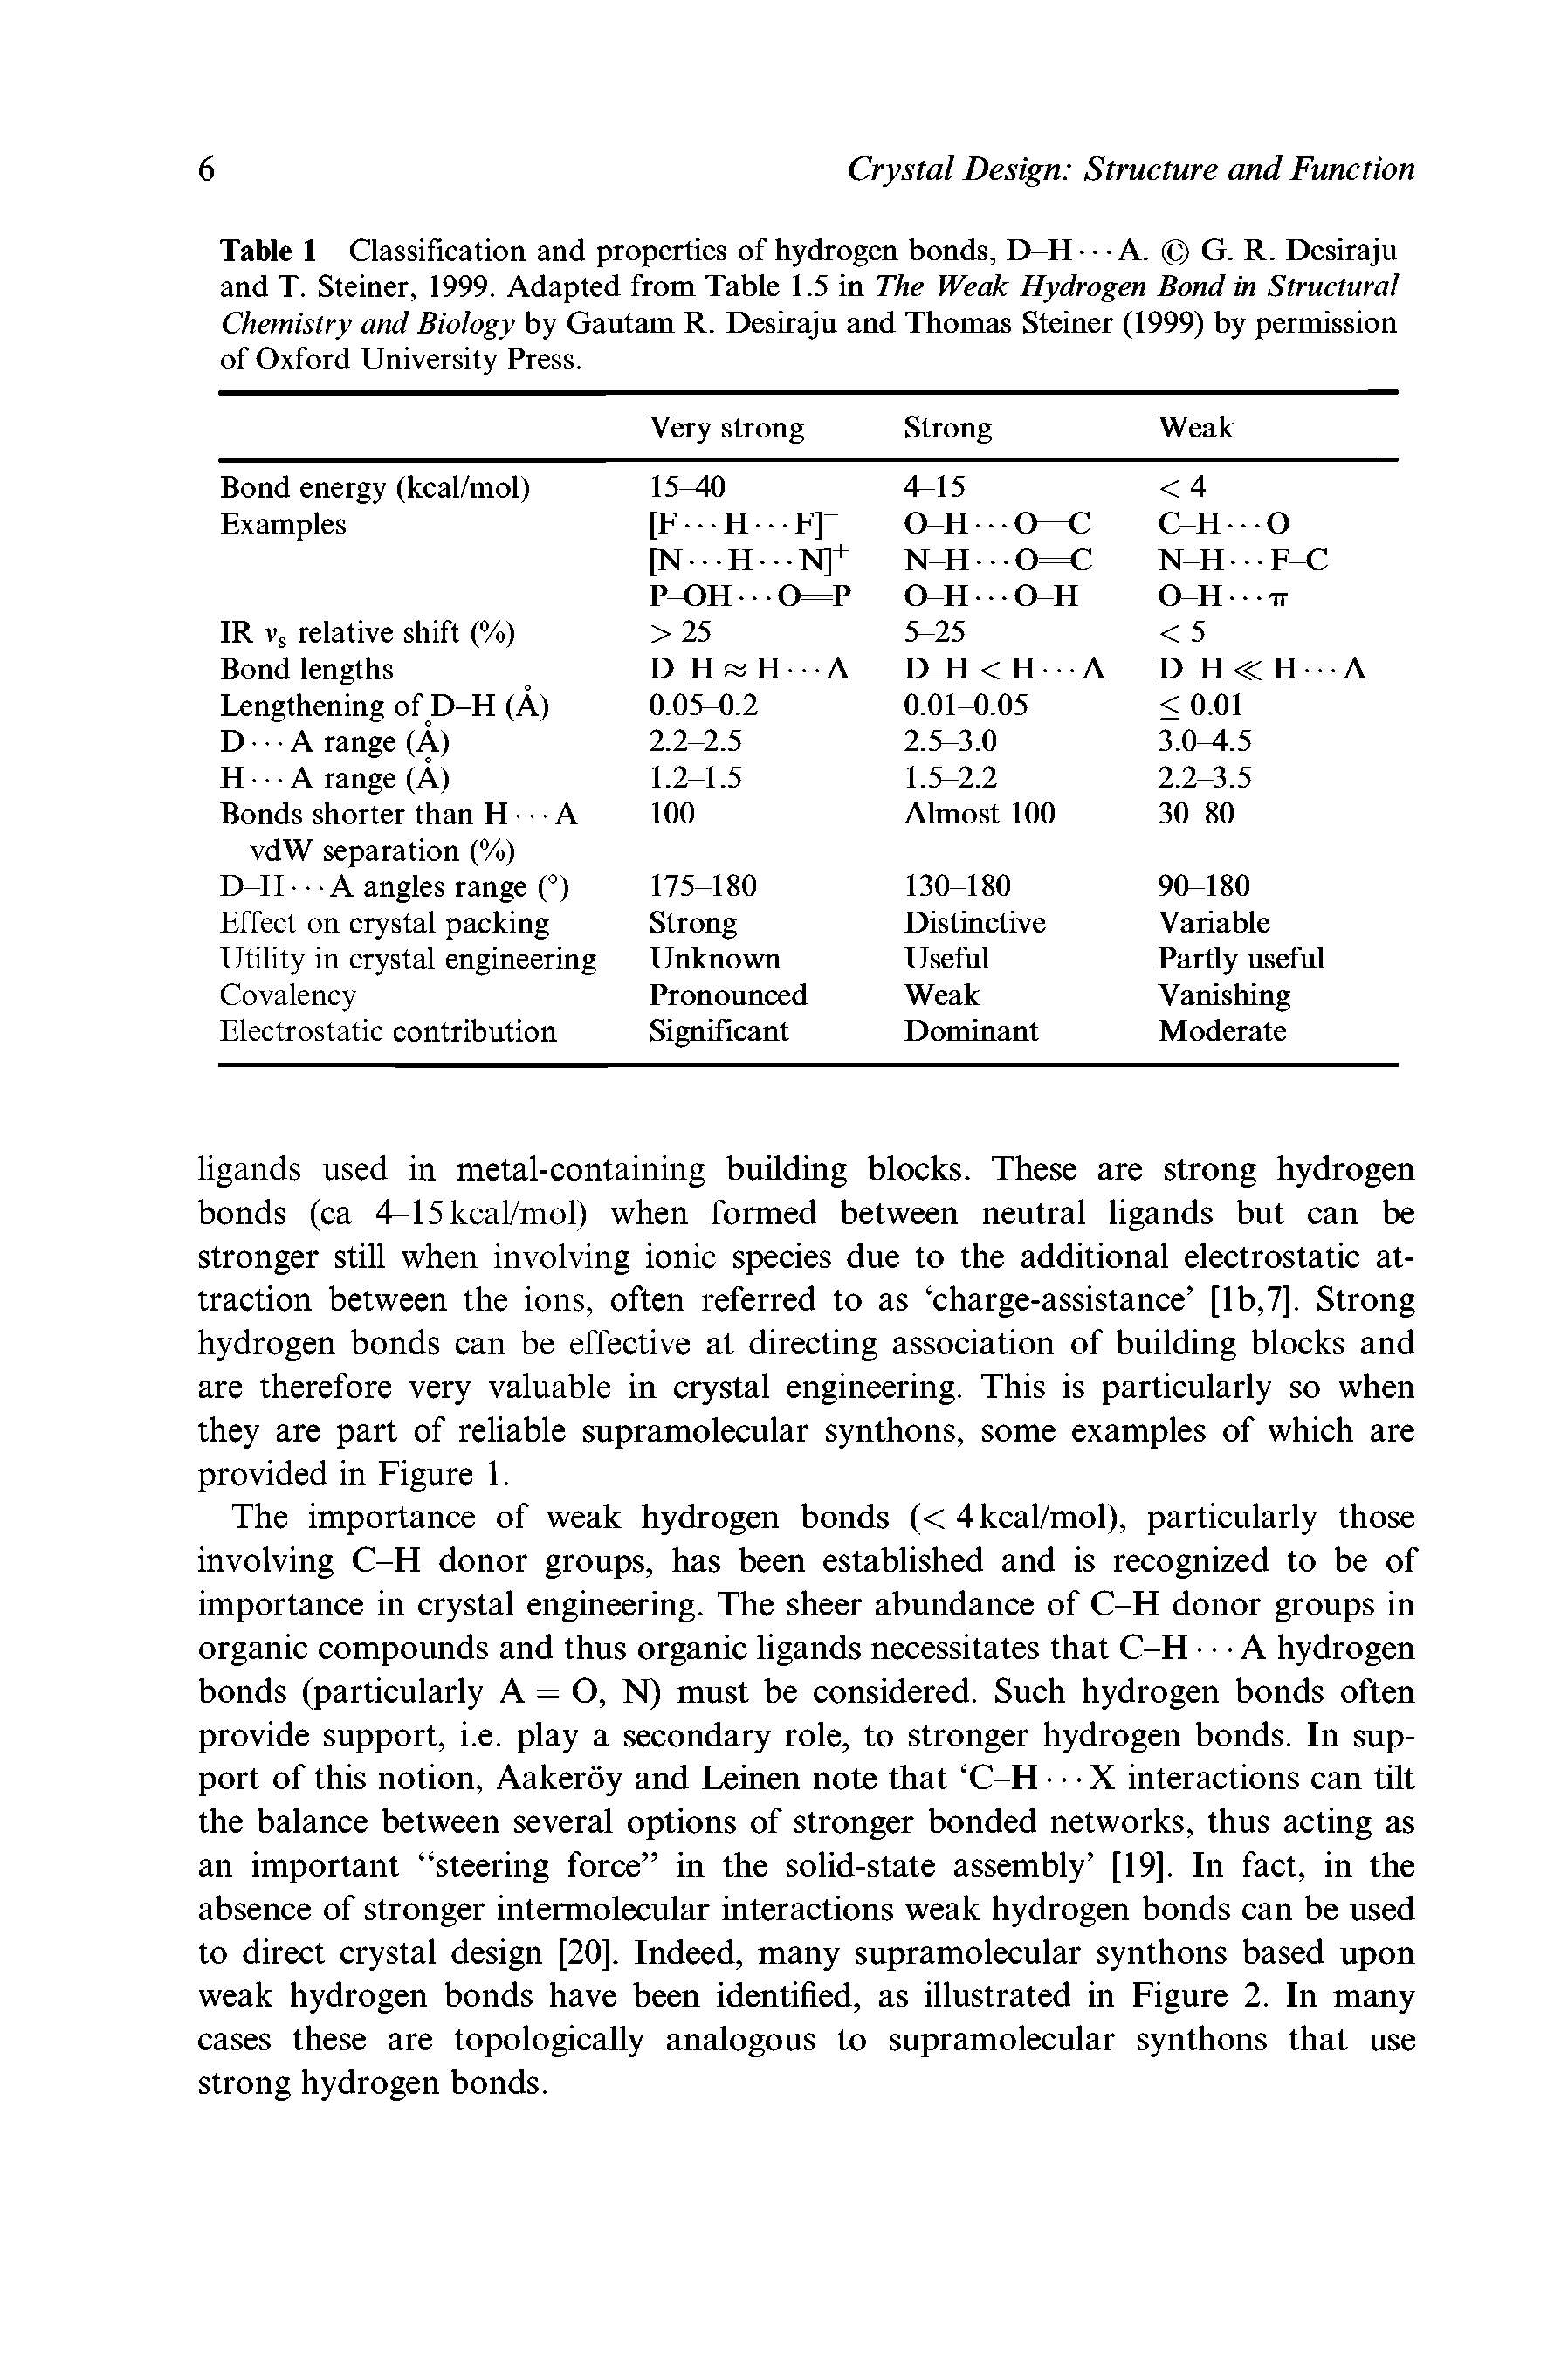 Table 1 Classification and properties of hydrogen bonds, D H A. G. R. Desiraju and T. Steiner, 1999. Adapted from Table 1.5 in The Weak Hydrogen Bond in Structural Chemistry and Biology by Gautam R. Desiraju and Thomas Steiner (1999) by permission of Oxford University Press.